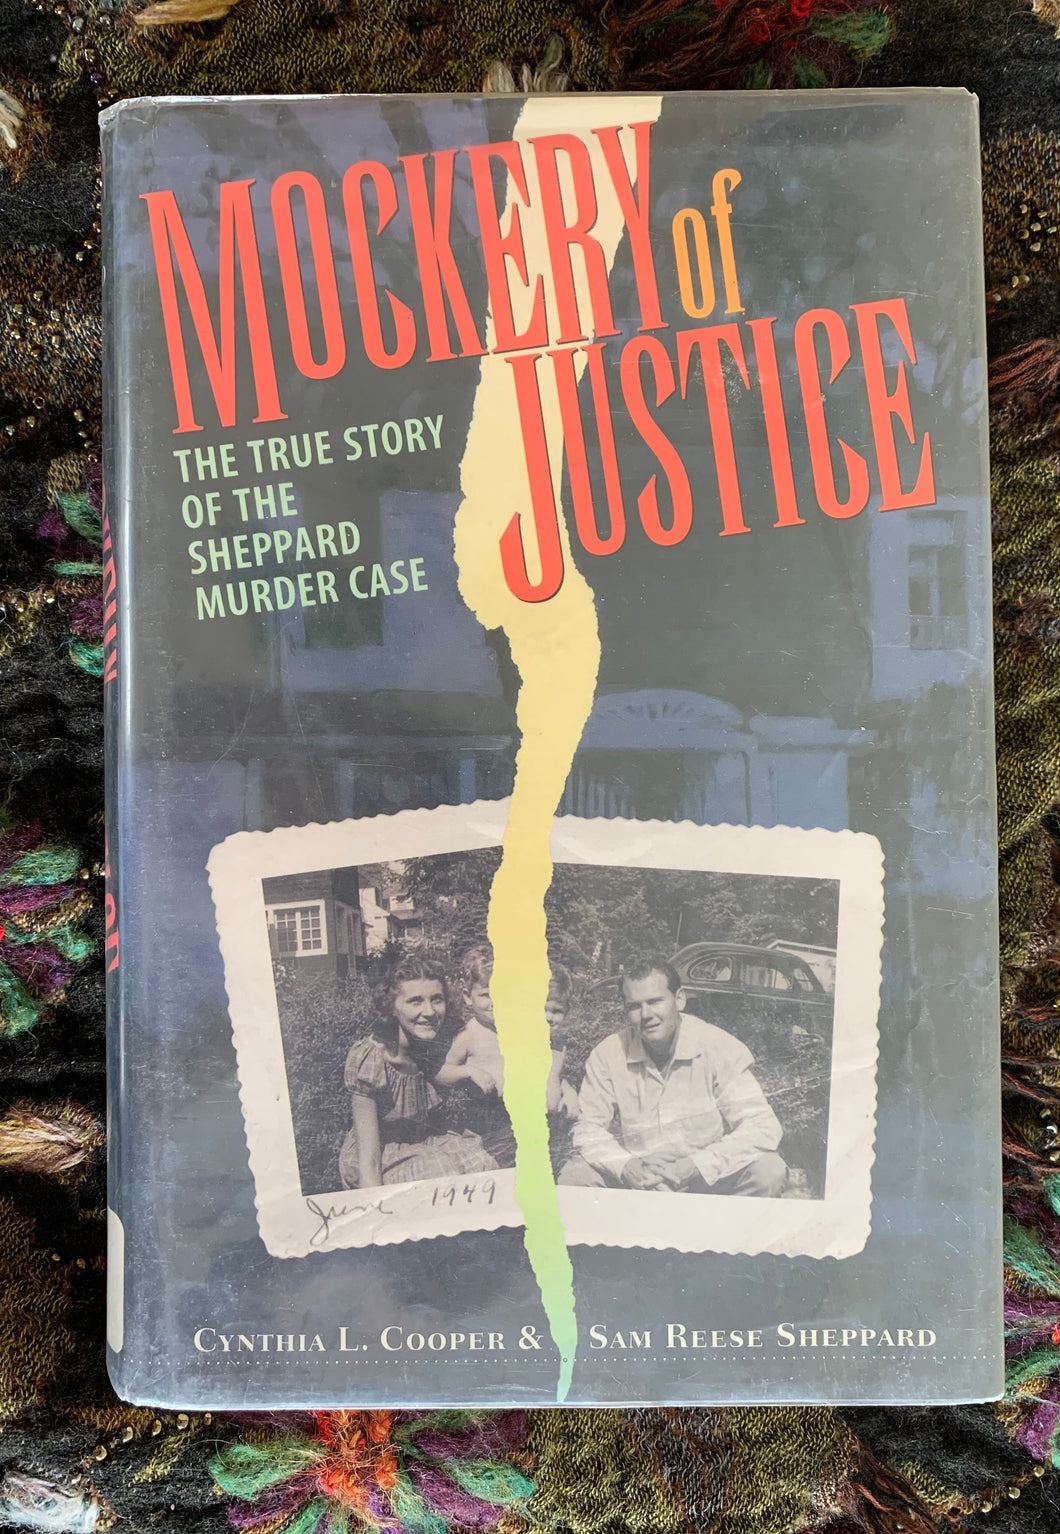 Mockery of Justice: The True Story of the Sheppard Murder Case